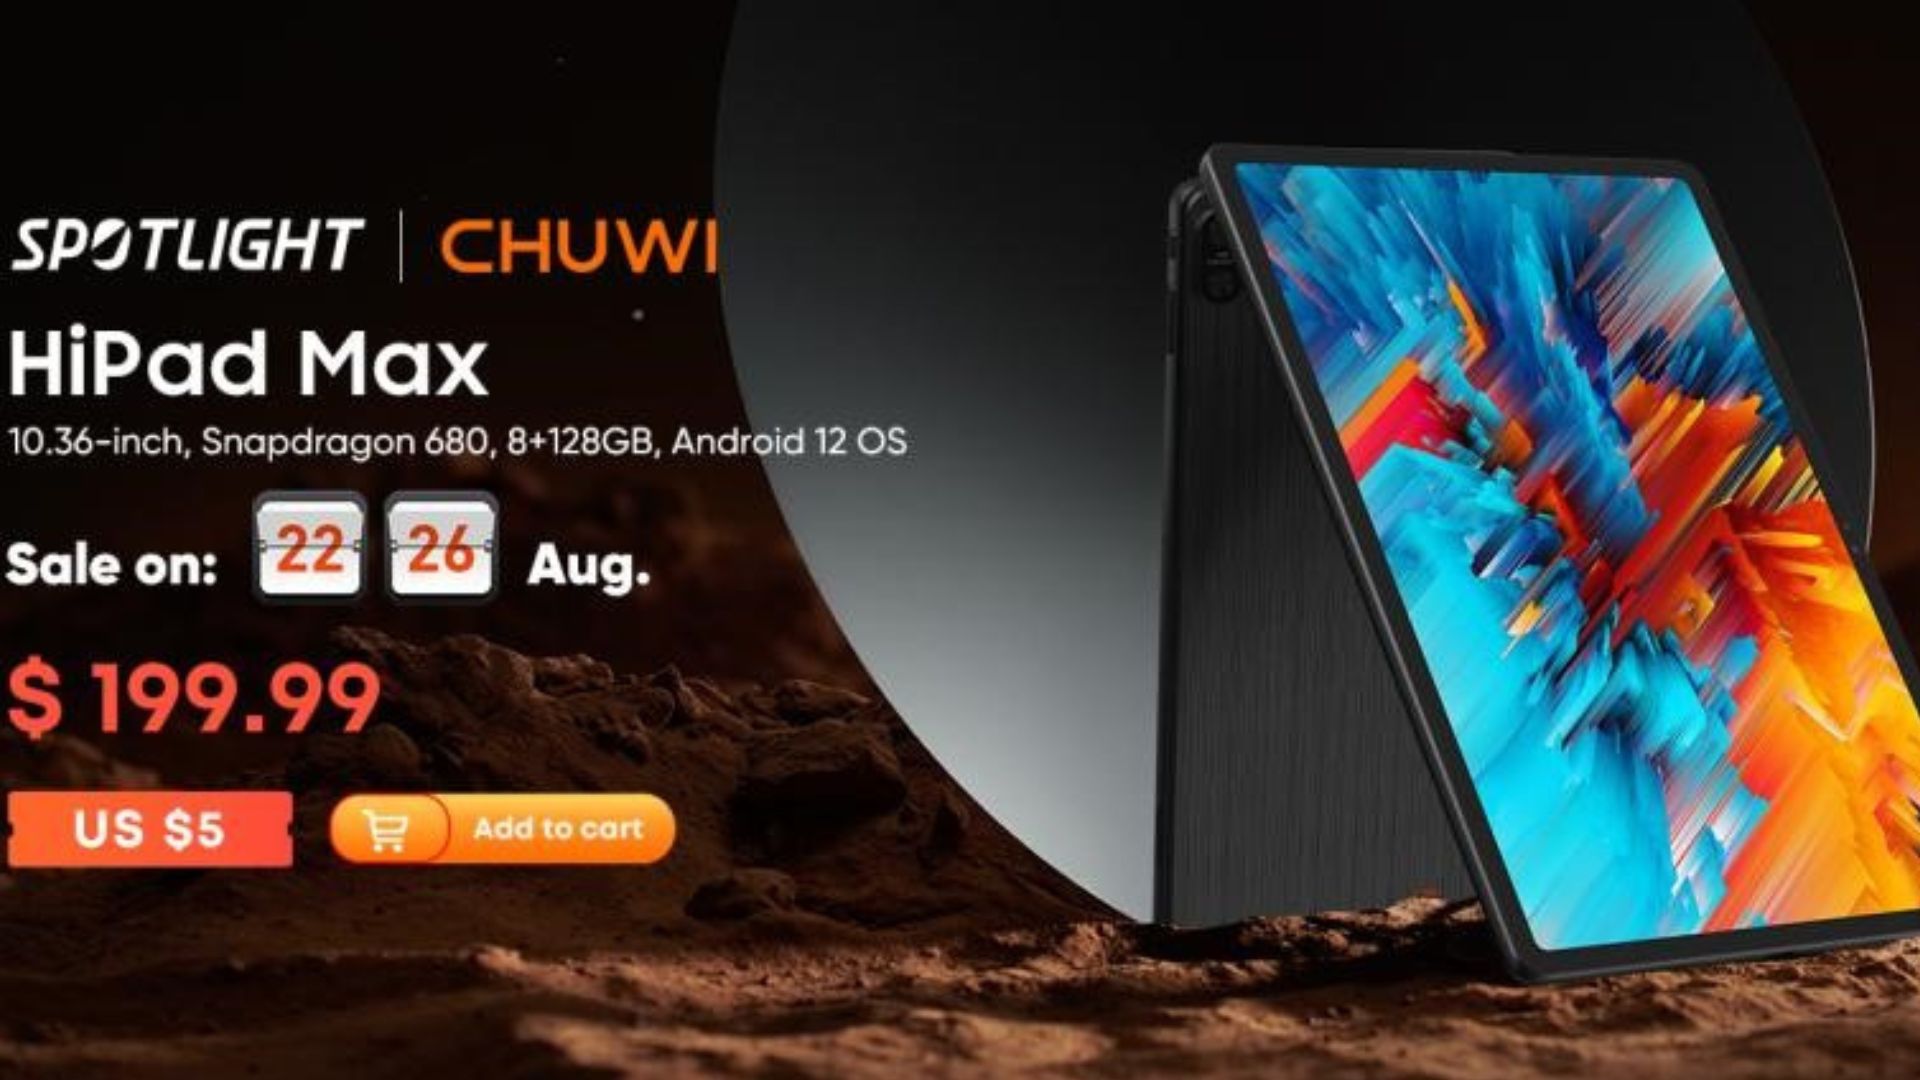 Chuwi HiPad Max: New Android tablet launches with a Qualcomm